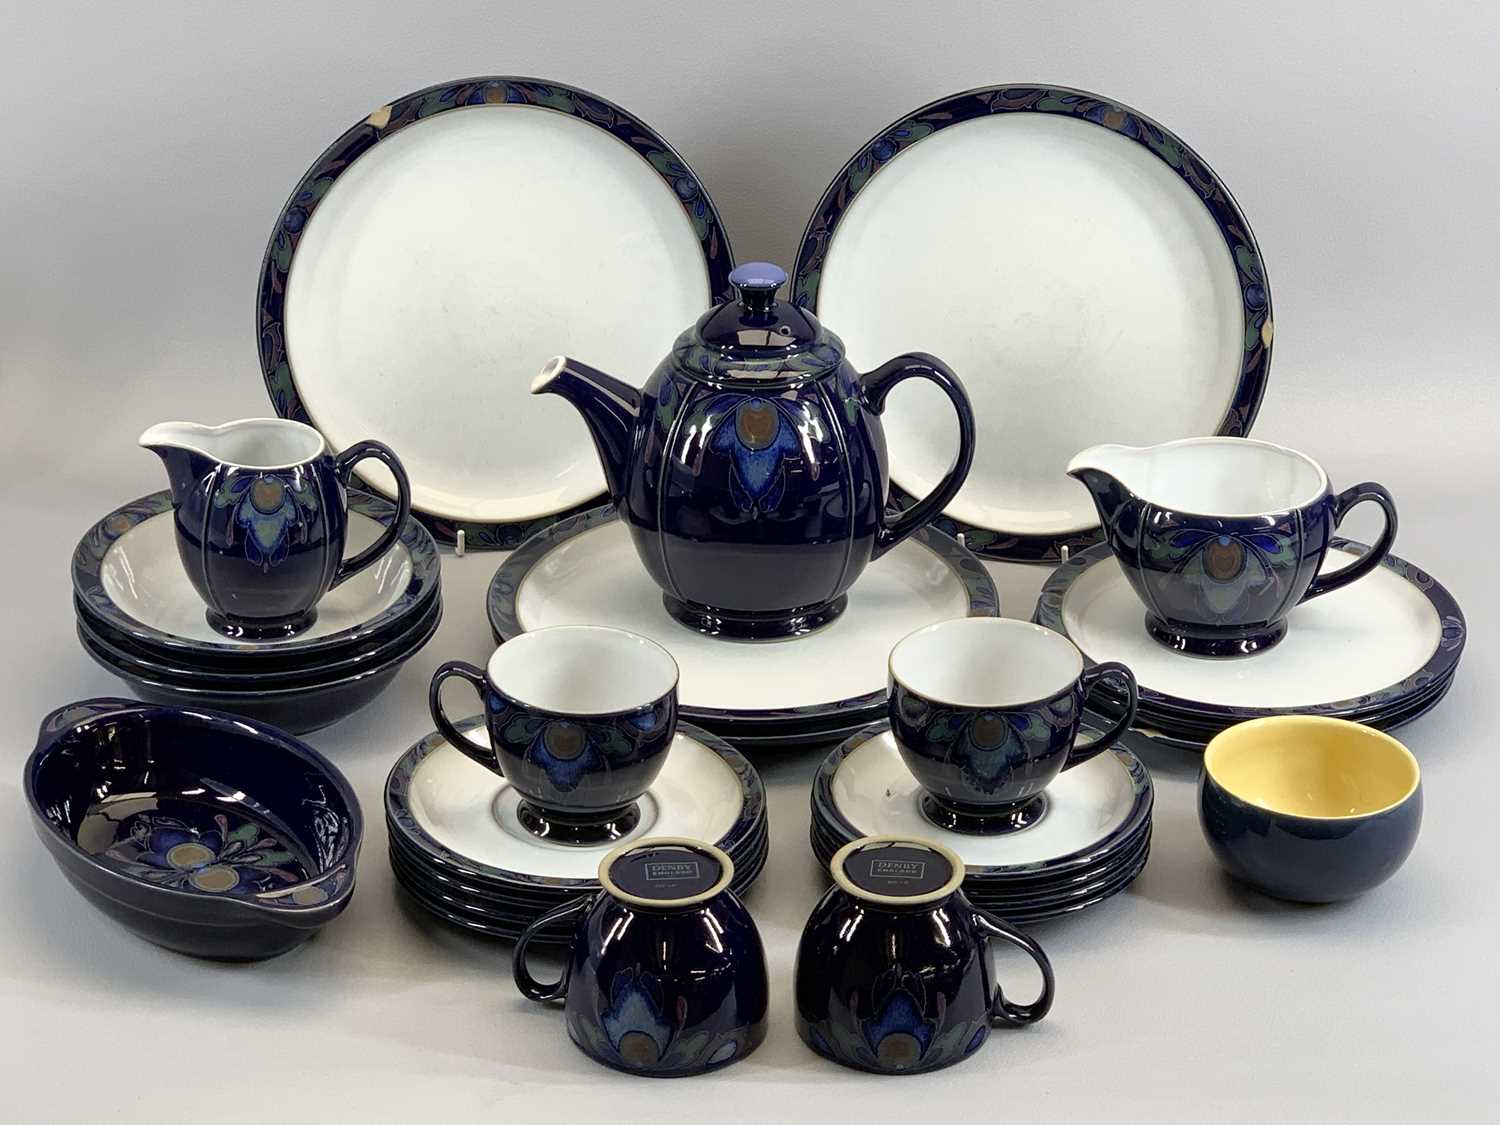 DENBY 'BAROQUE' TABLEWARE - approximately 25 pieces (plus an odd pattern sugar bowl)